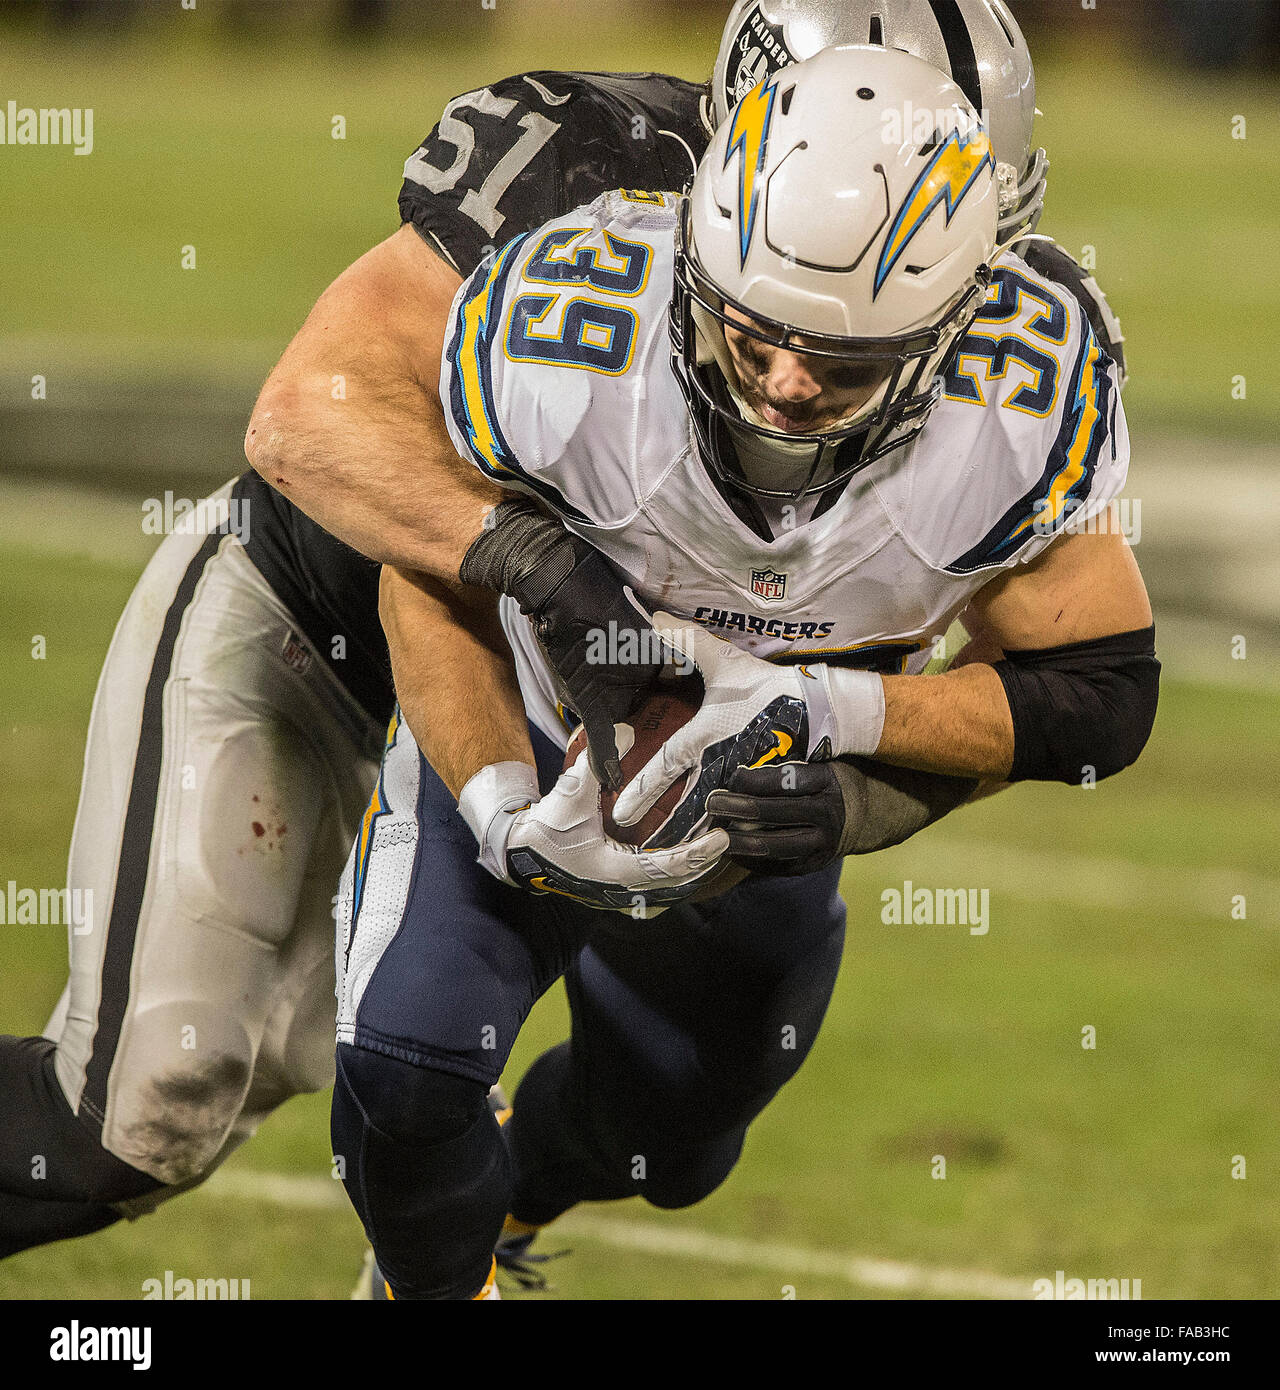 Oakland, California, USA. 24th Dec, 2015. Oakland Raiders inside linebacker Ben Heeney (51) tackles San Diego Chargers running back Danny Woodhead (39) on Sunday, December 24, 2015, at O.co Coliseum in Oakland, California. The Raiders defeated the Chargers 23-20. Al Golub/CSM/Alamy Live News Stock Photo